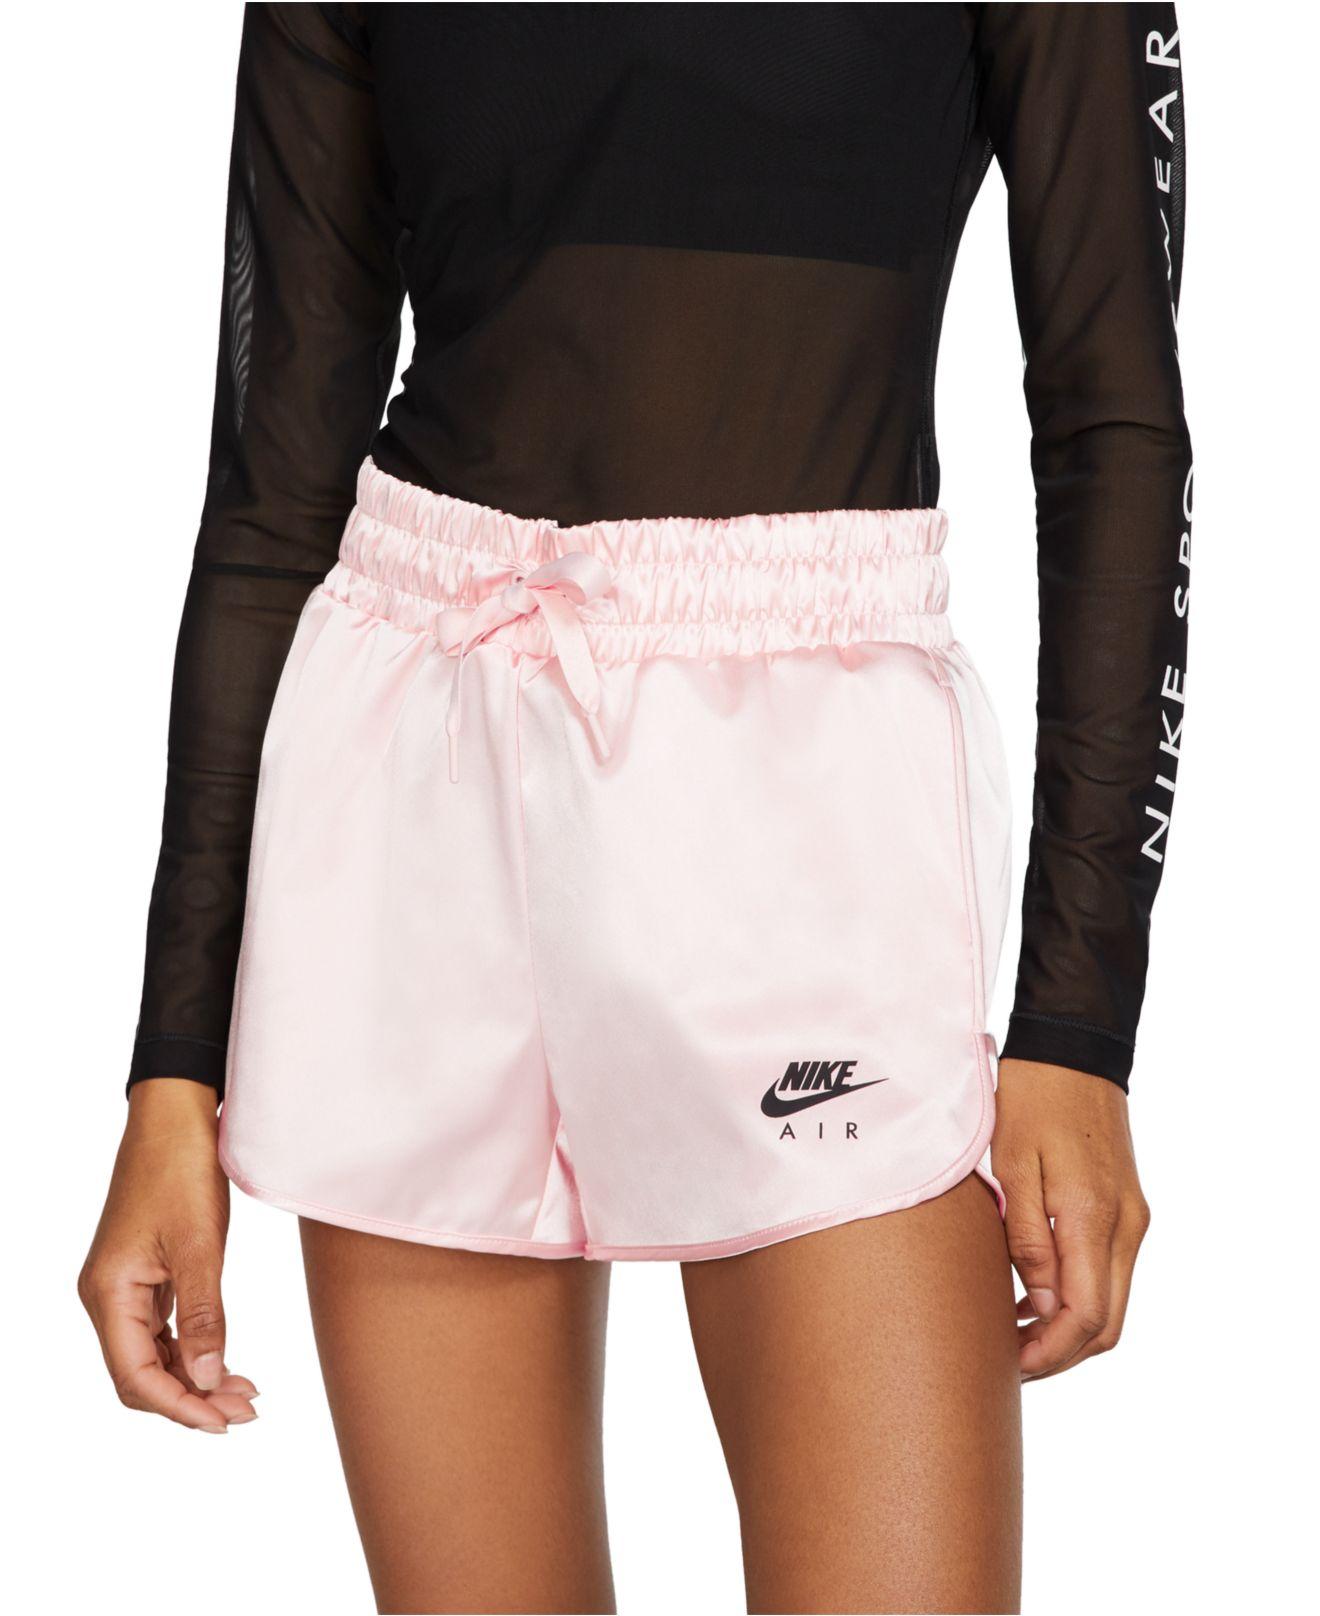 Nike Satin Air Shorts in Pink - Lyst